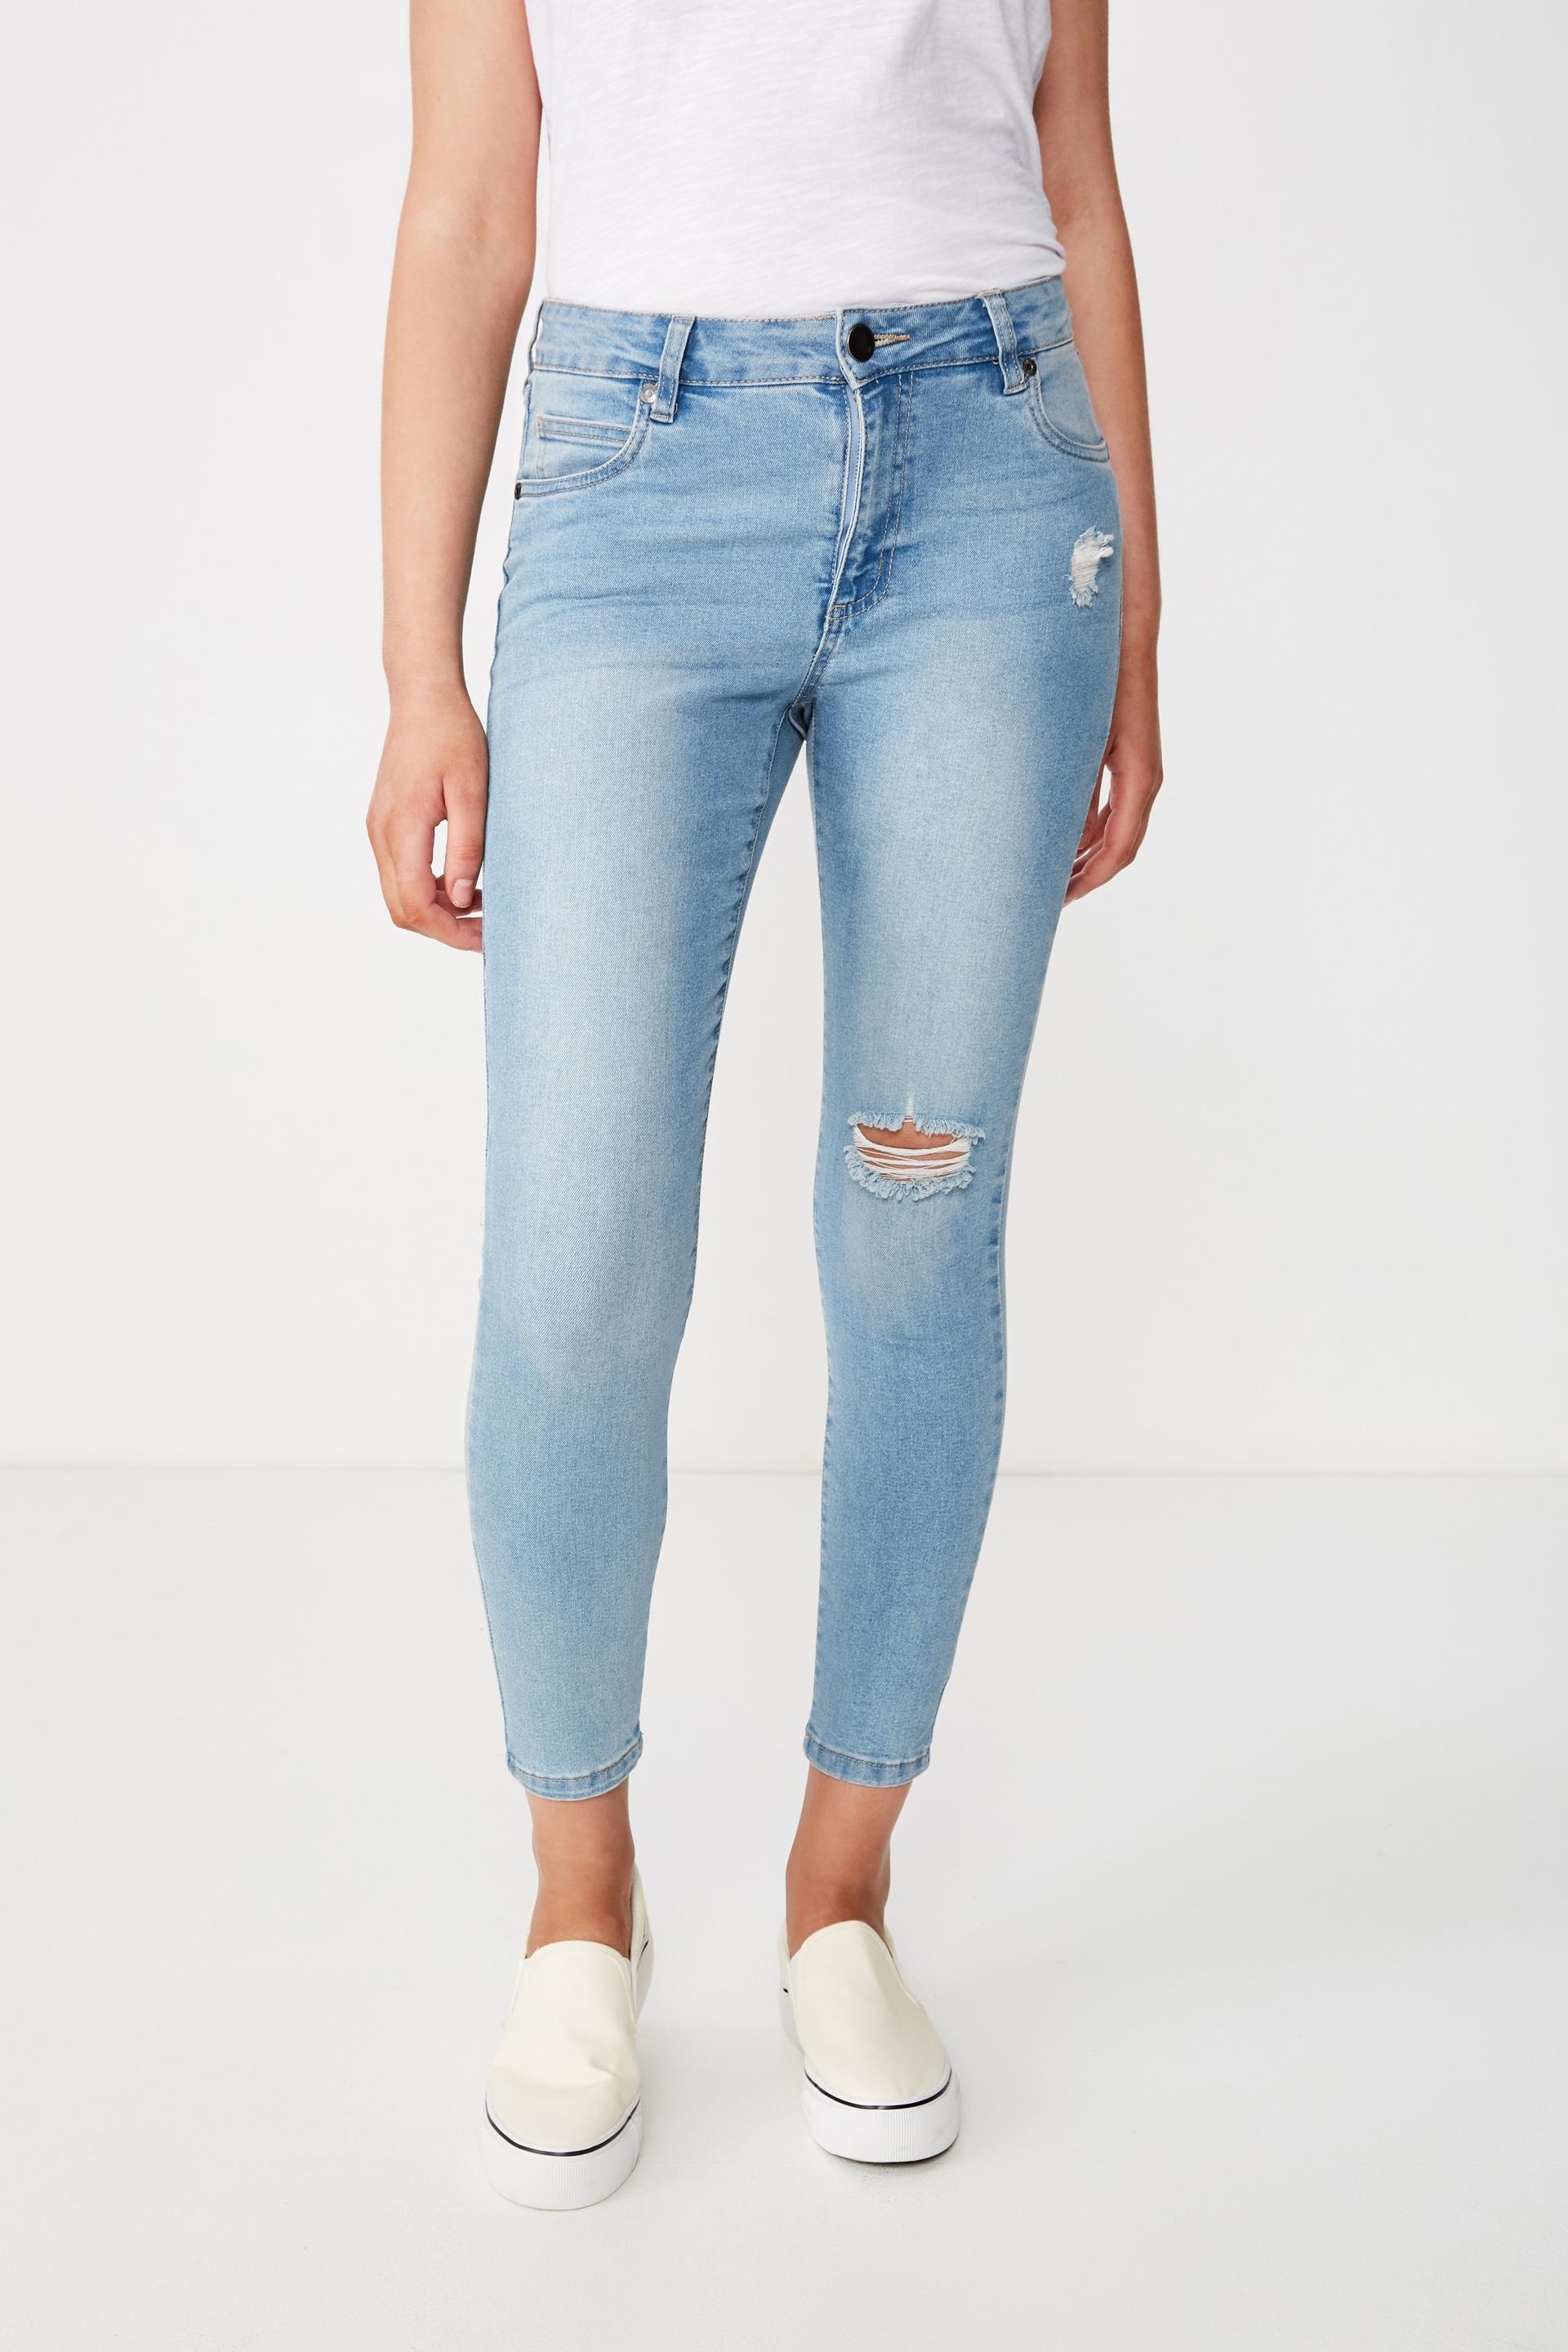 Mid rise grazer skinny jean - blue rips Cotton On Jeans | Superbalist.com